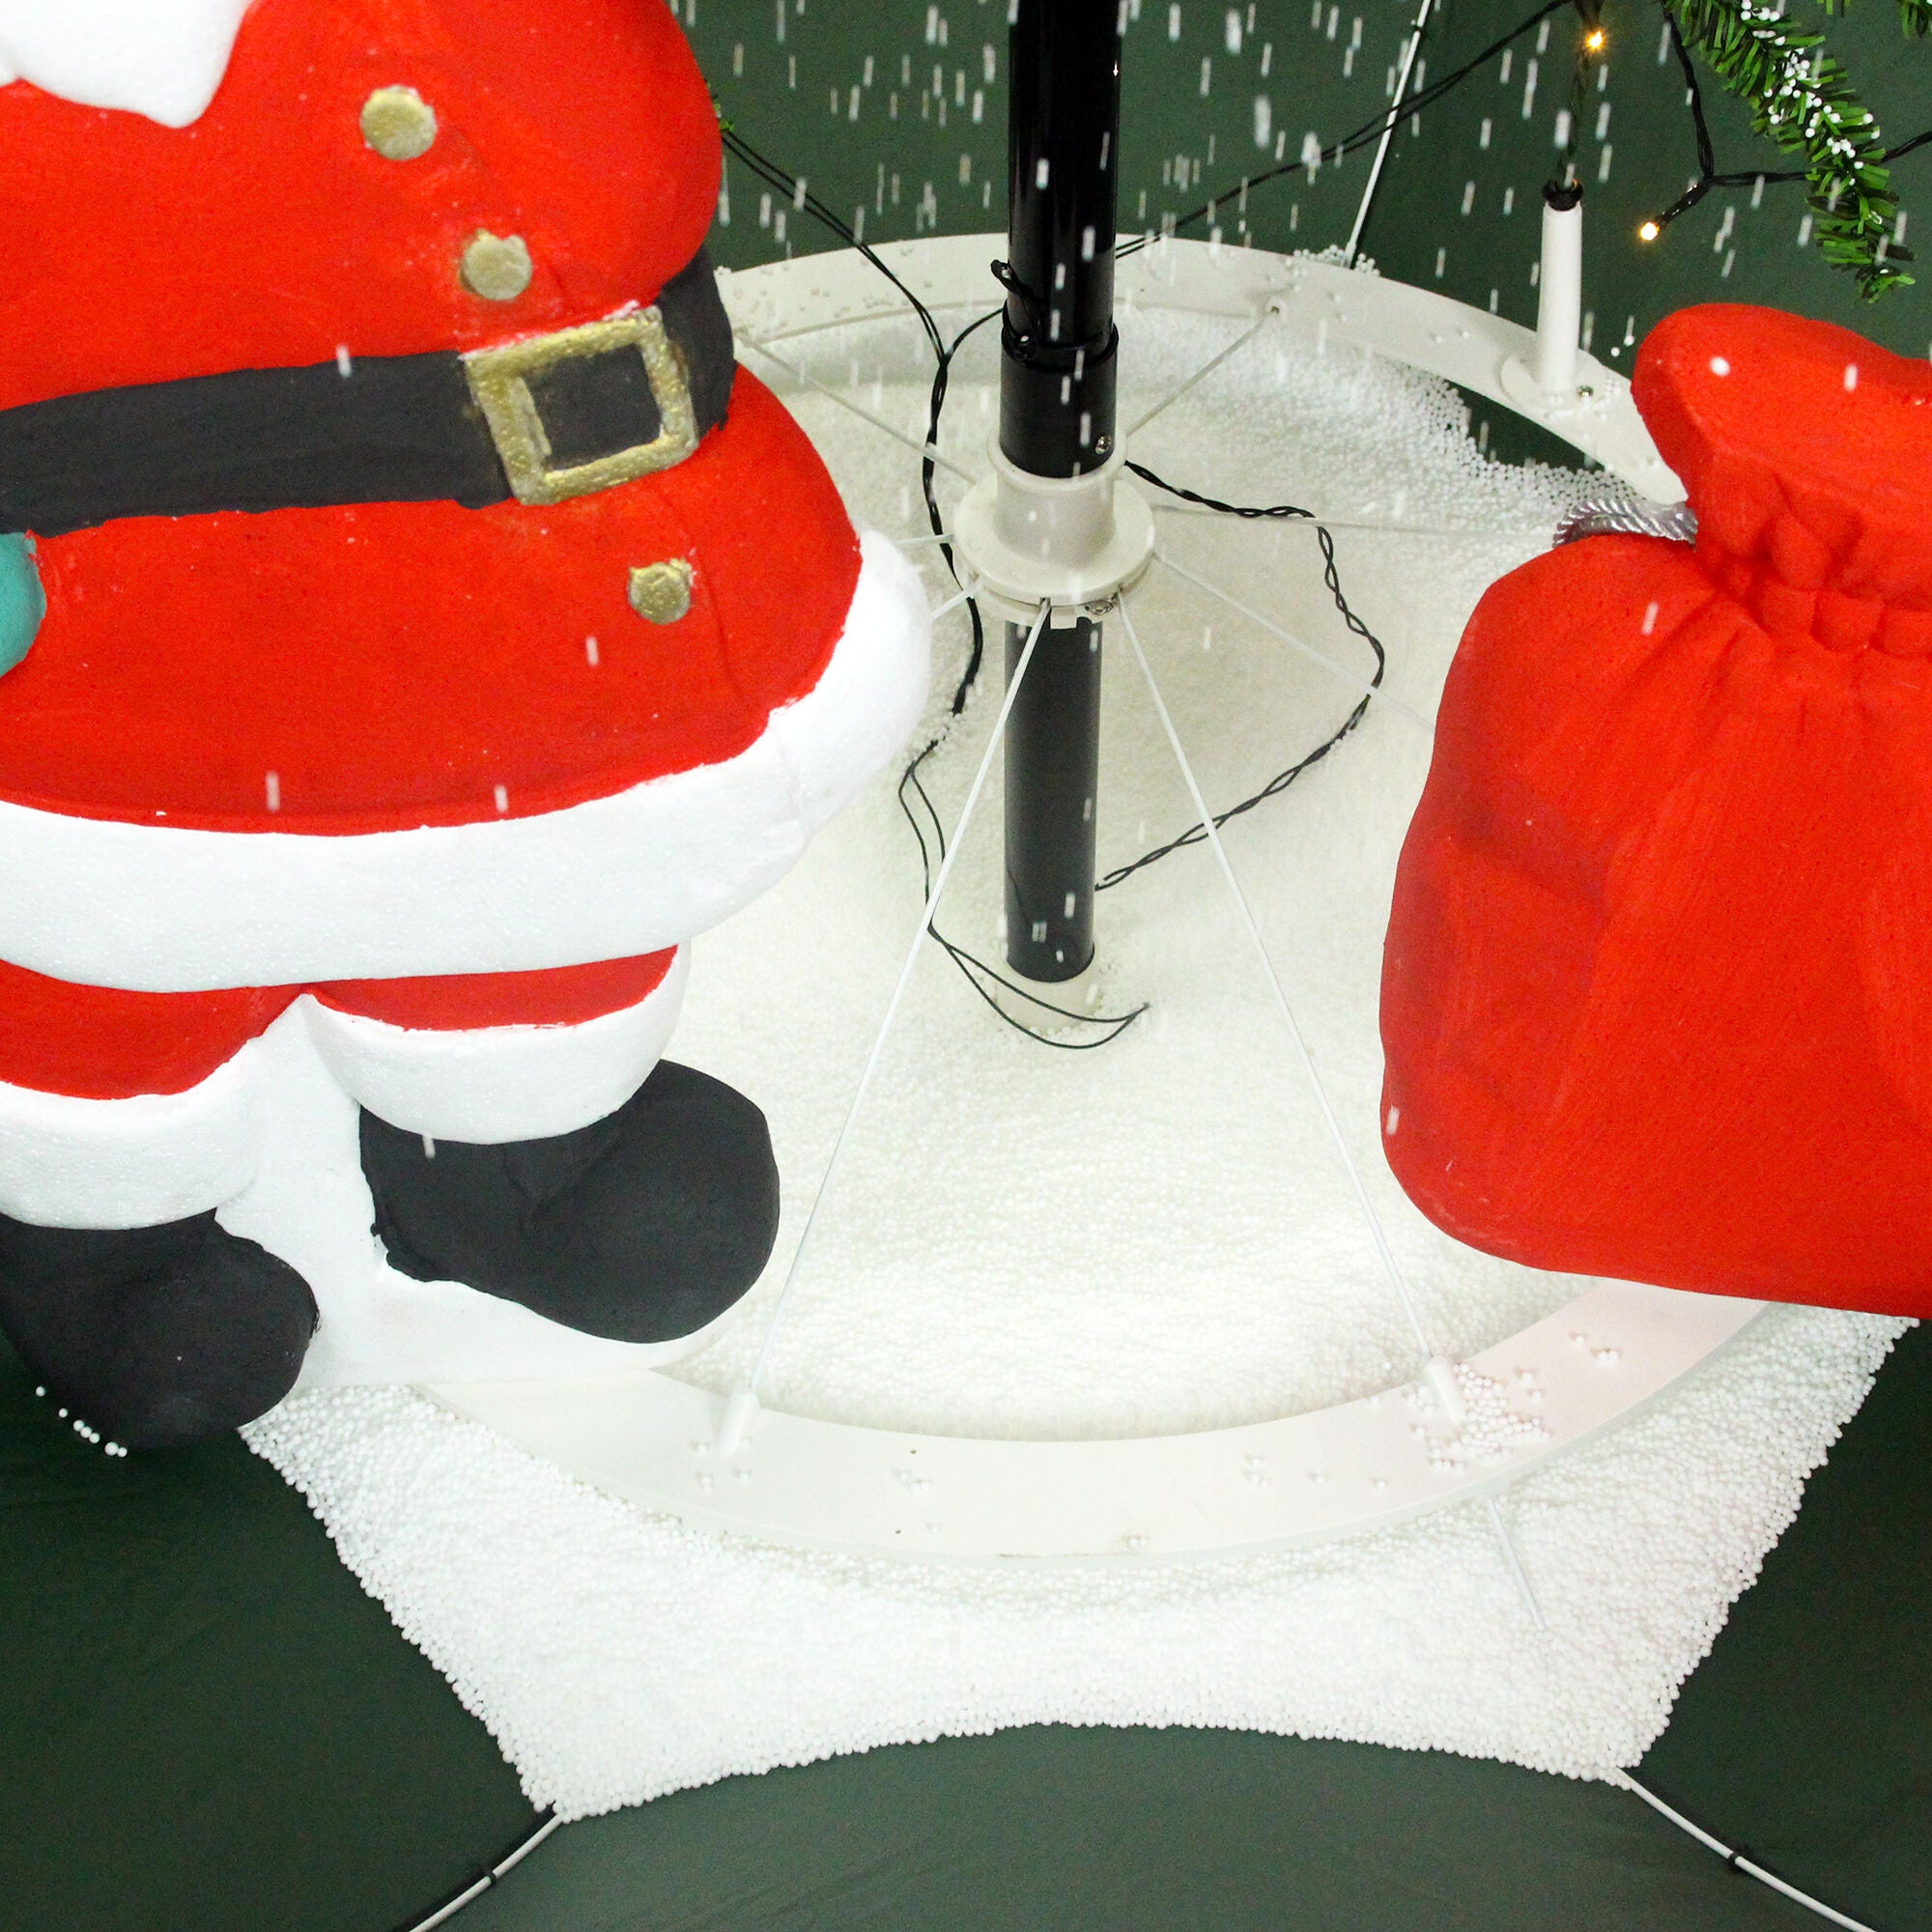 Fraser Hill Farm -  Let It Snow Series 47-In. Musical Santa Scene with Green Umbrella Base, Snow Function, and Lights